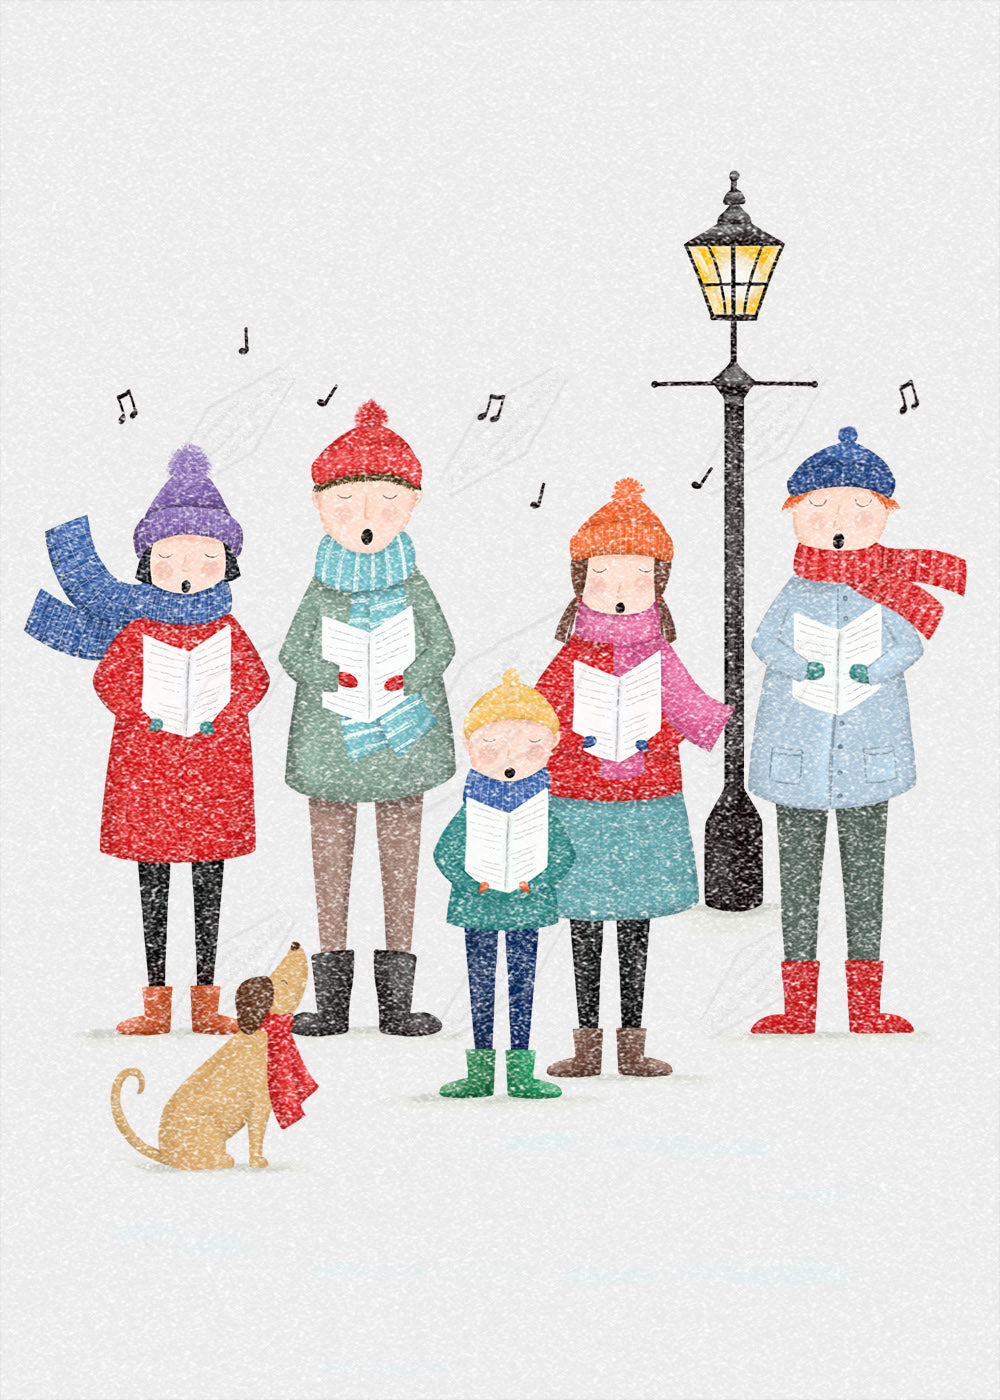 Snowy Carol Singers by Anna Aitken for Pure Art Licensing Agency & Surface Design Studio